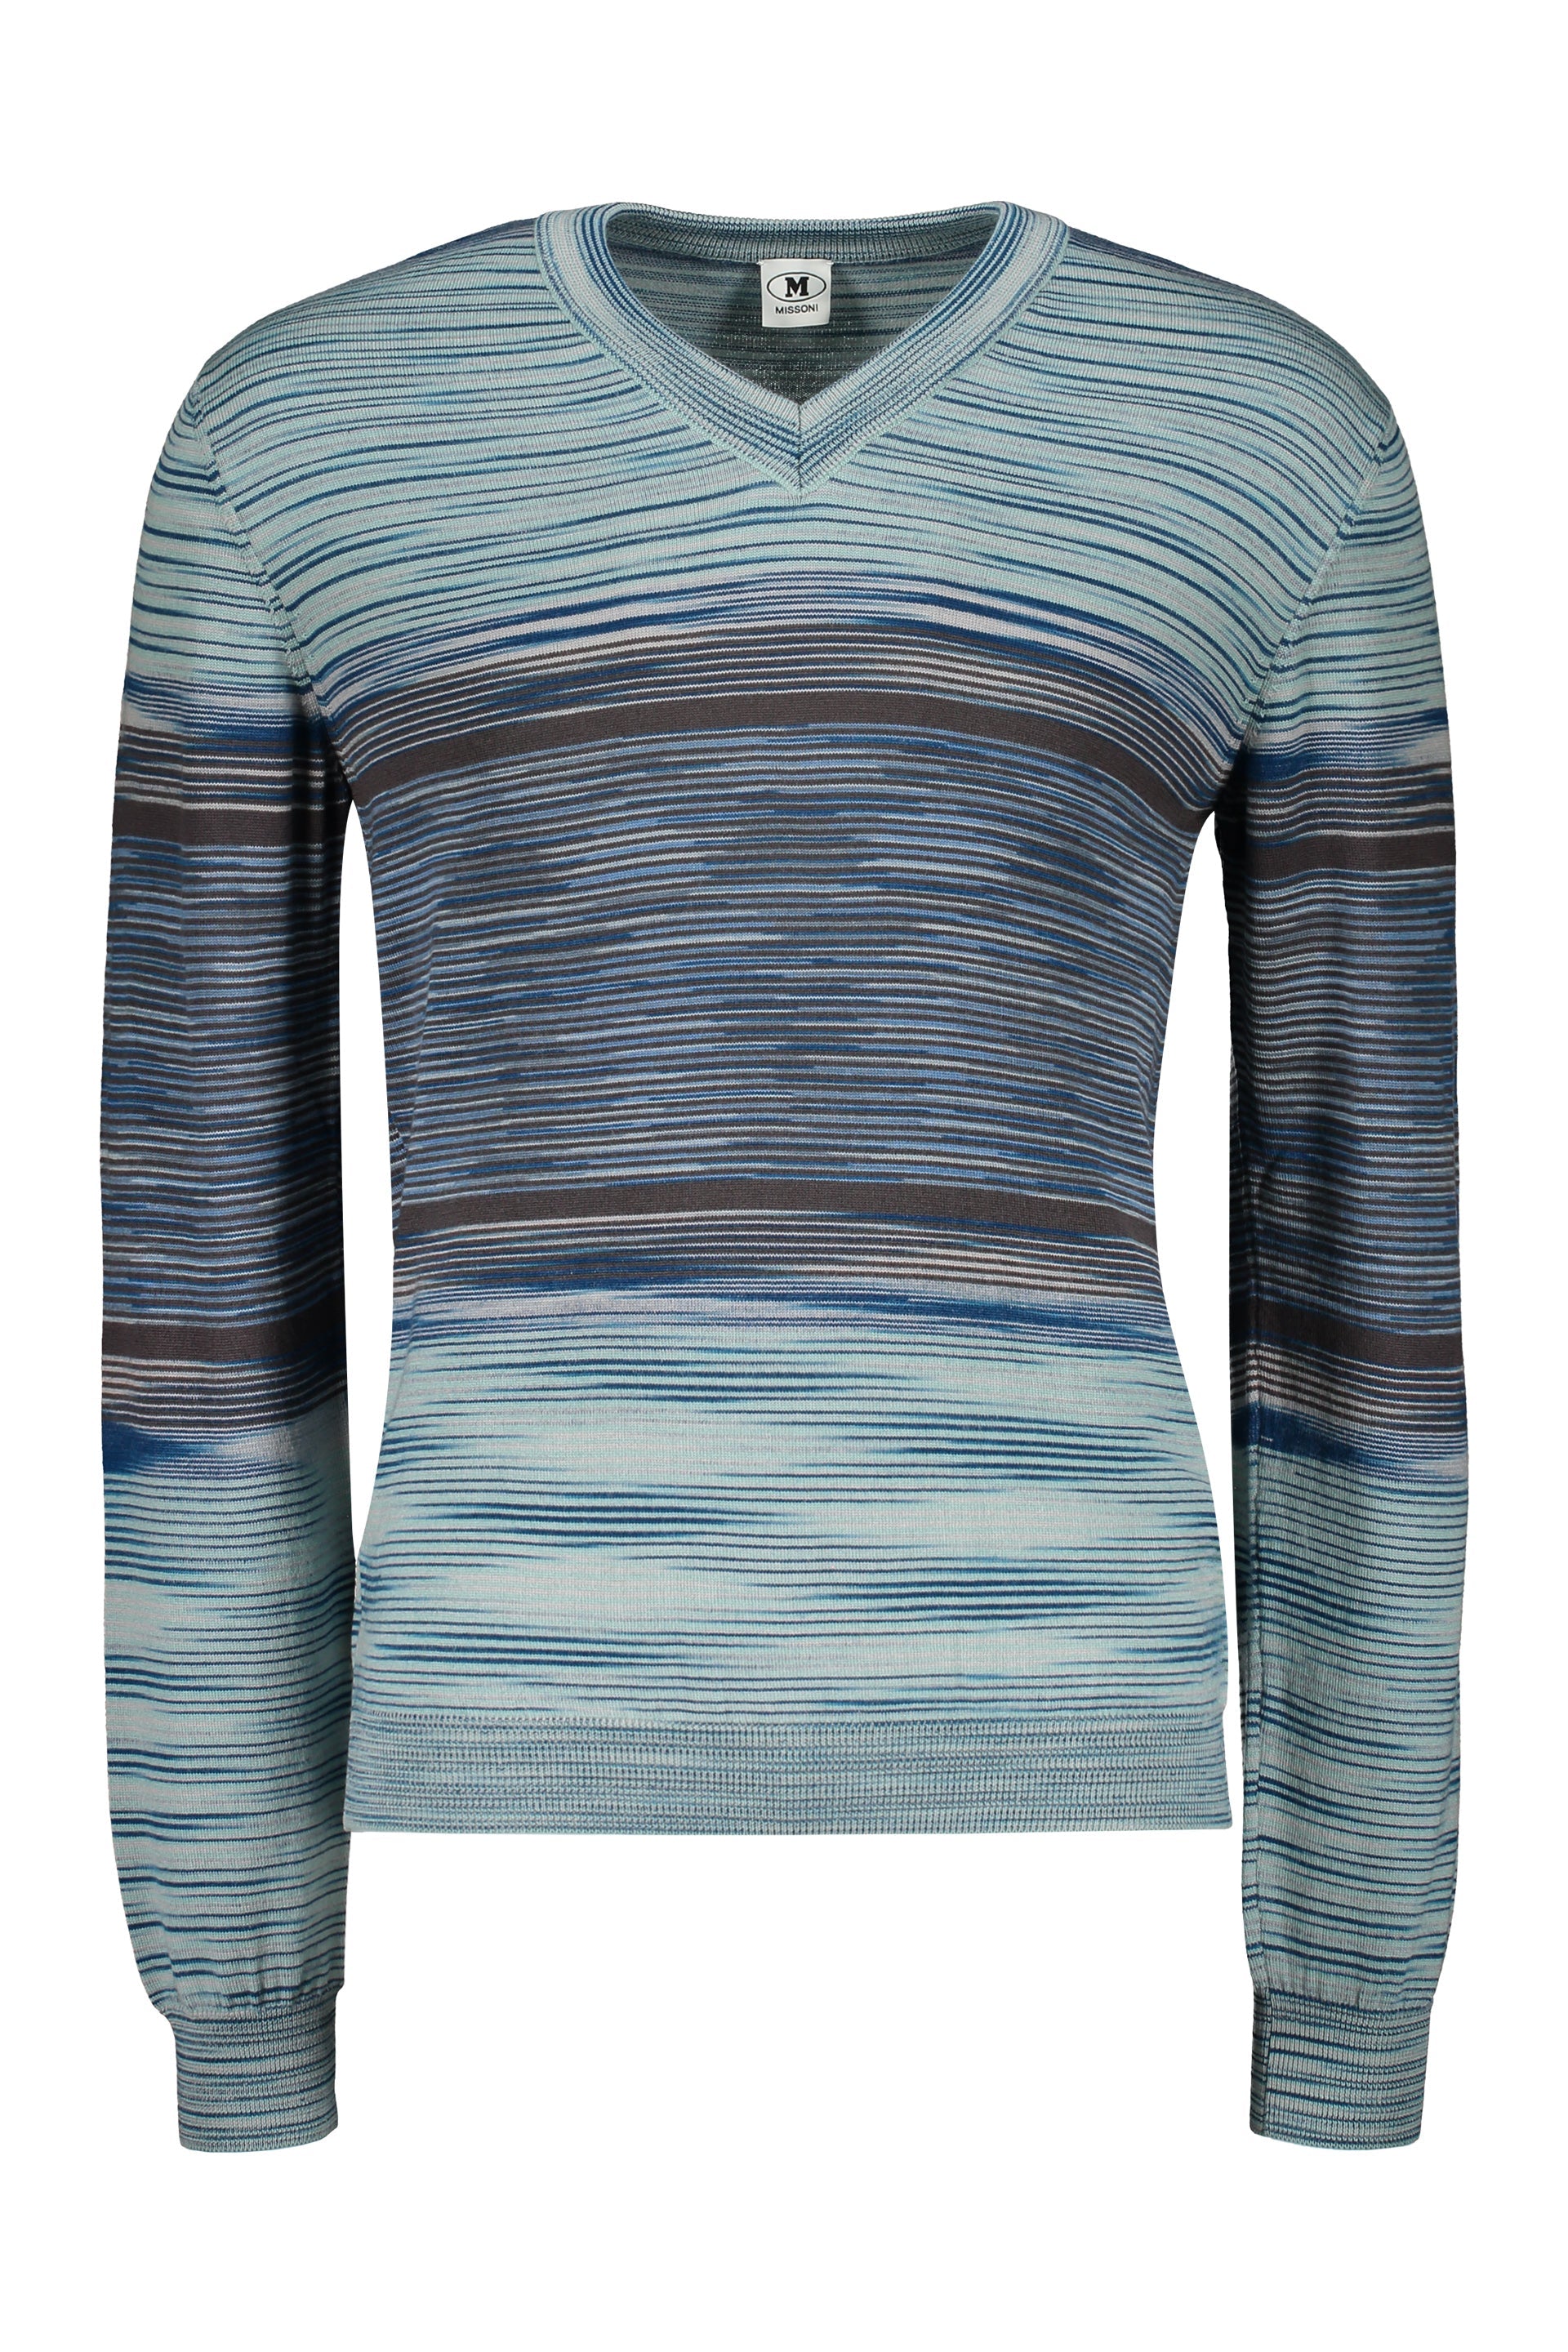 M-Missoni-OUTLET-SALE-Wool-V-neck-sweater-Strick-L-ARCHIVE-COLLECTION.jpg